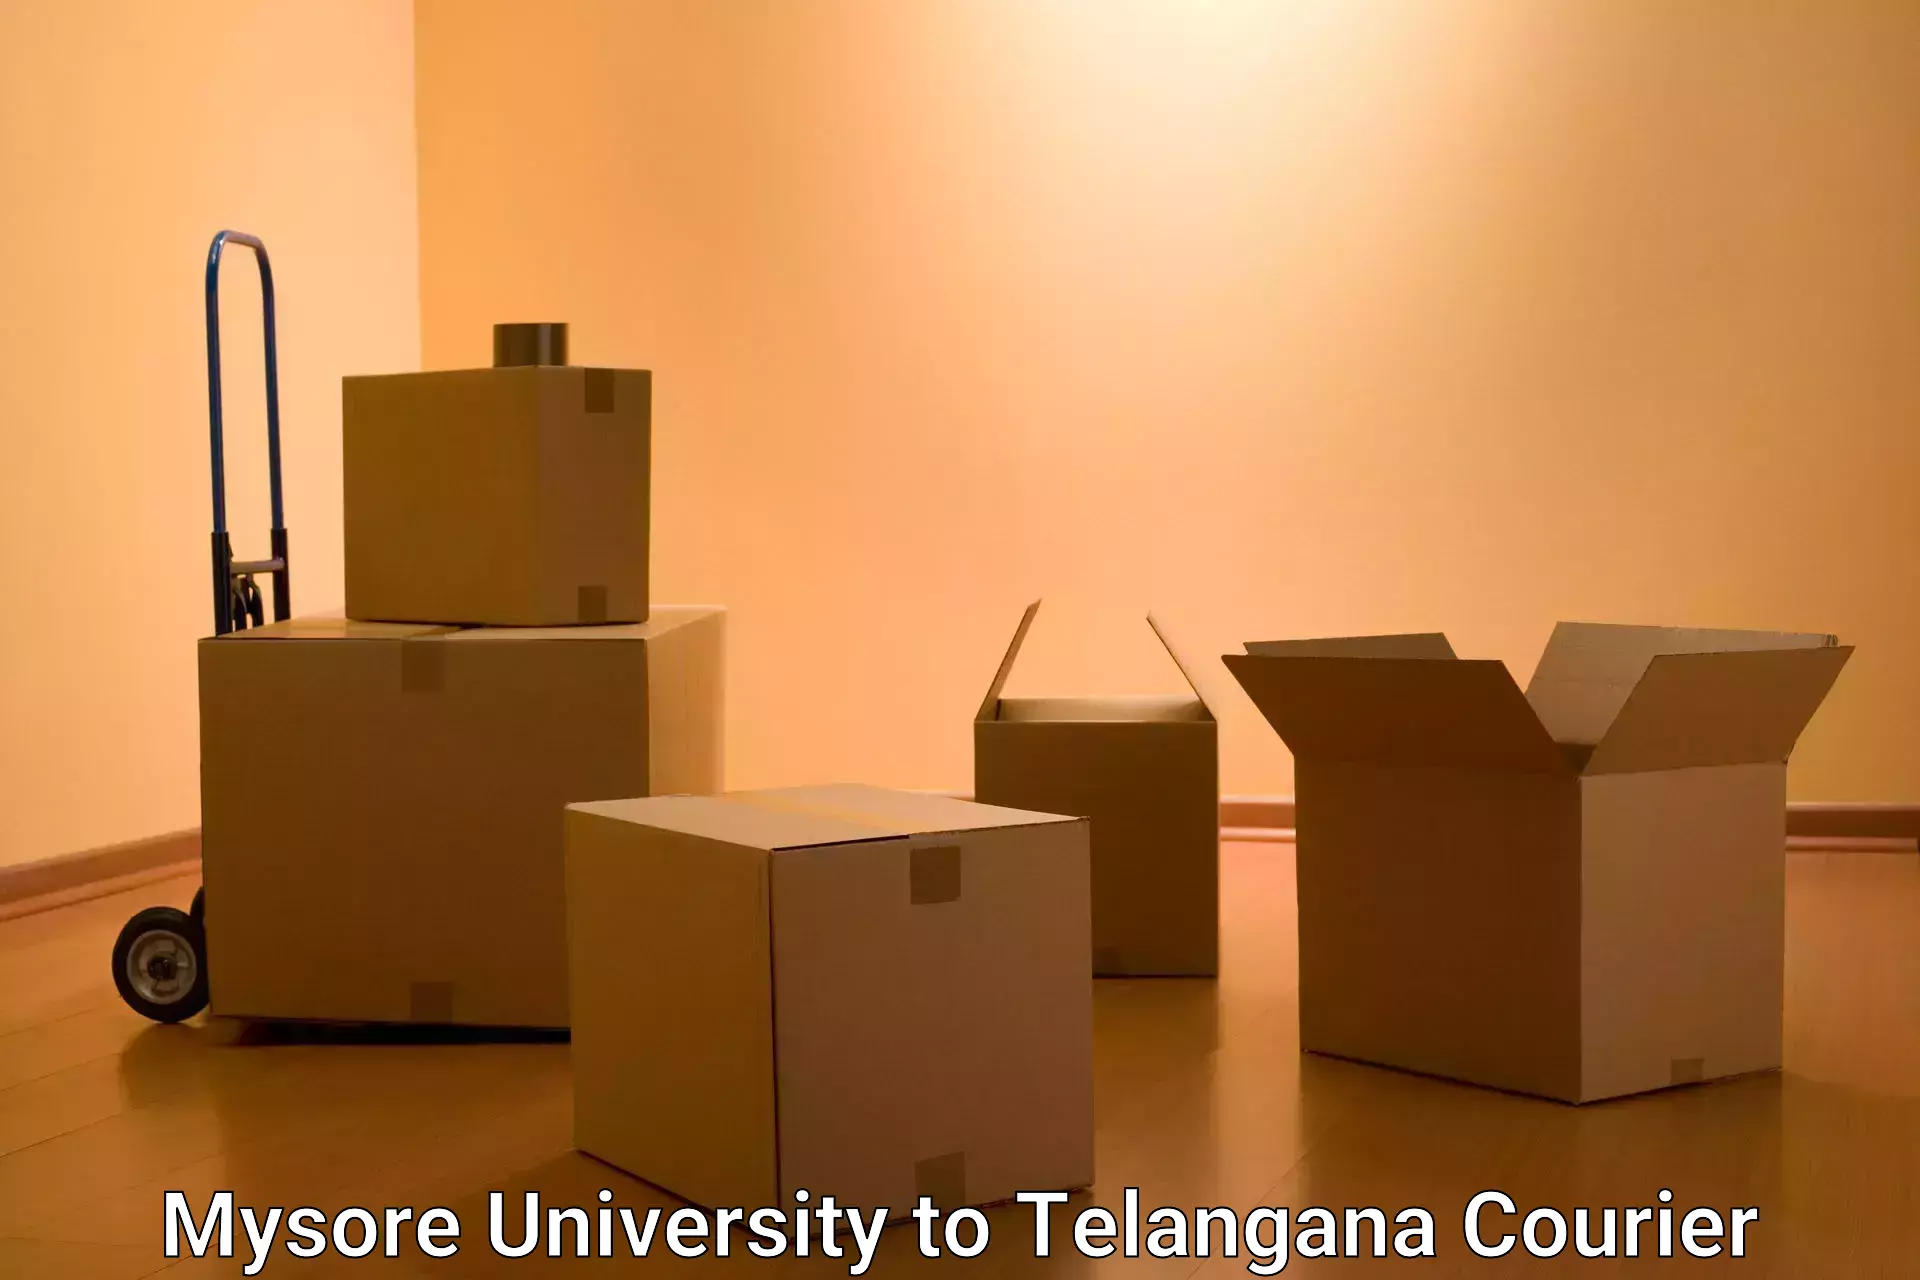 Residential courier service Mysore University to Zahirabad